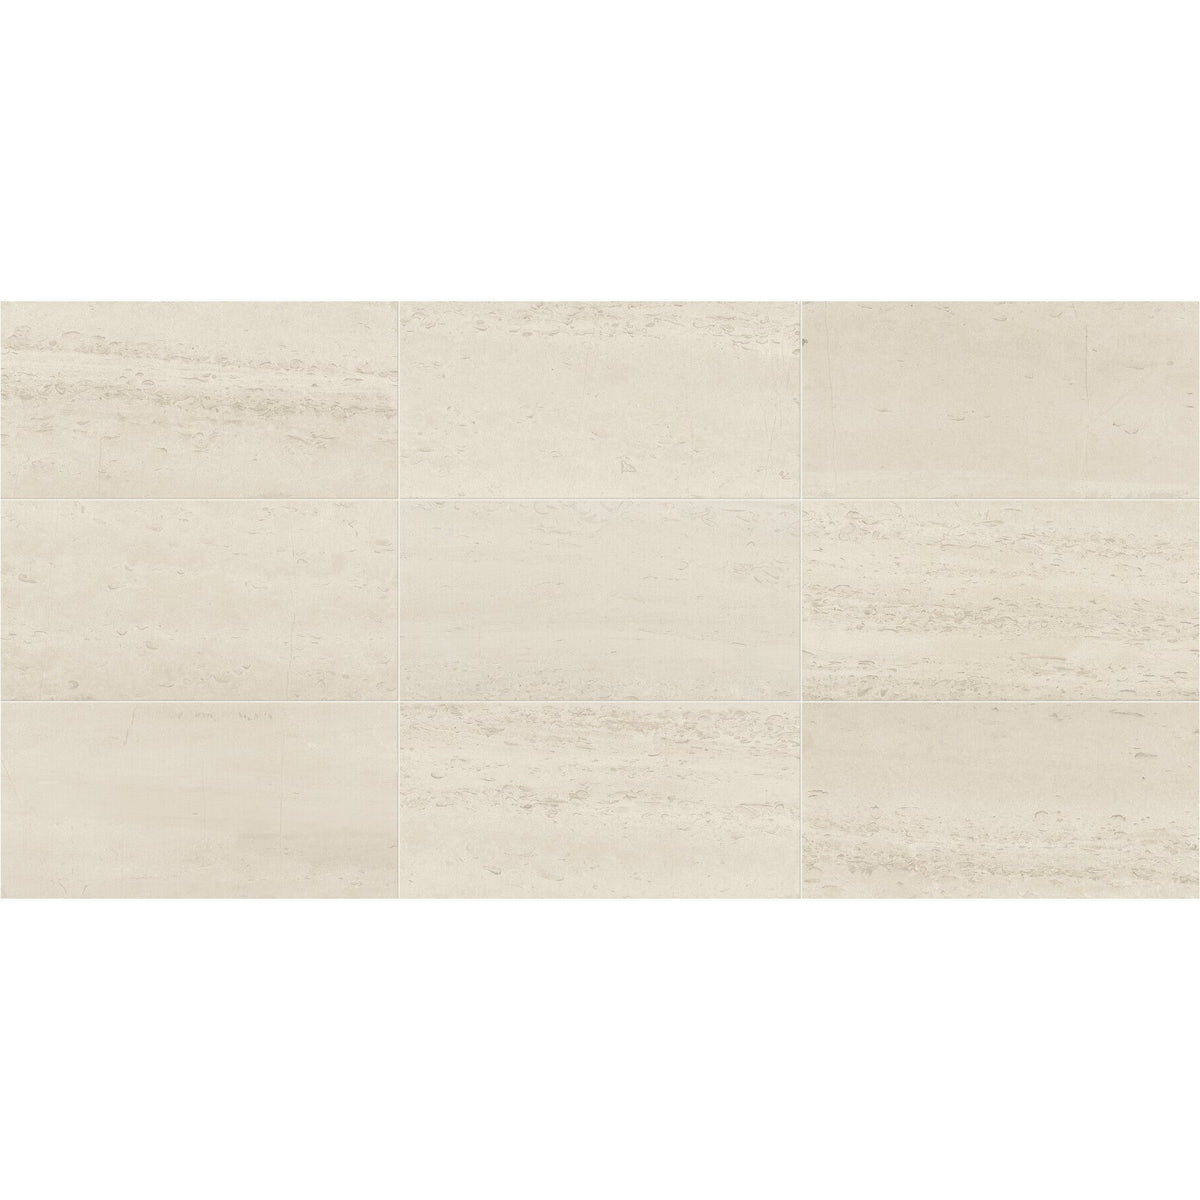 Daltile - Center City - 4 in. x 12 in. Natural Stone - Carlton Beige Polished